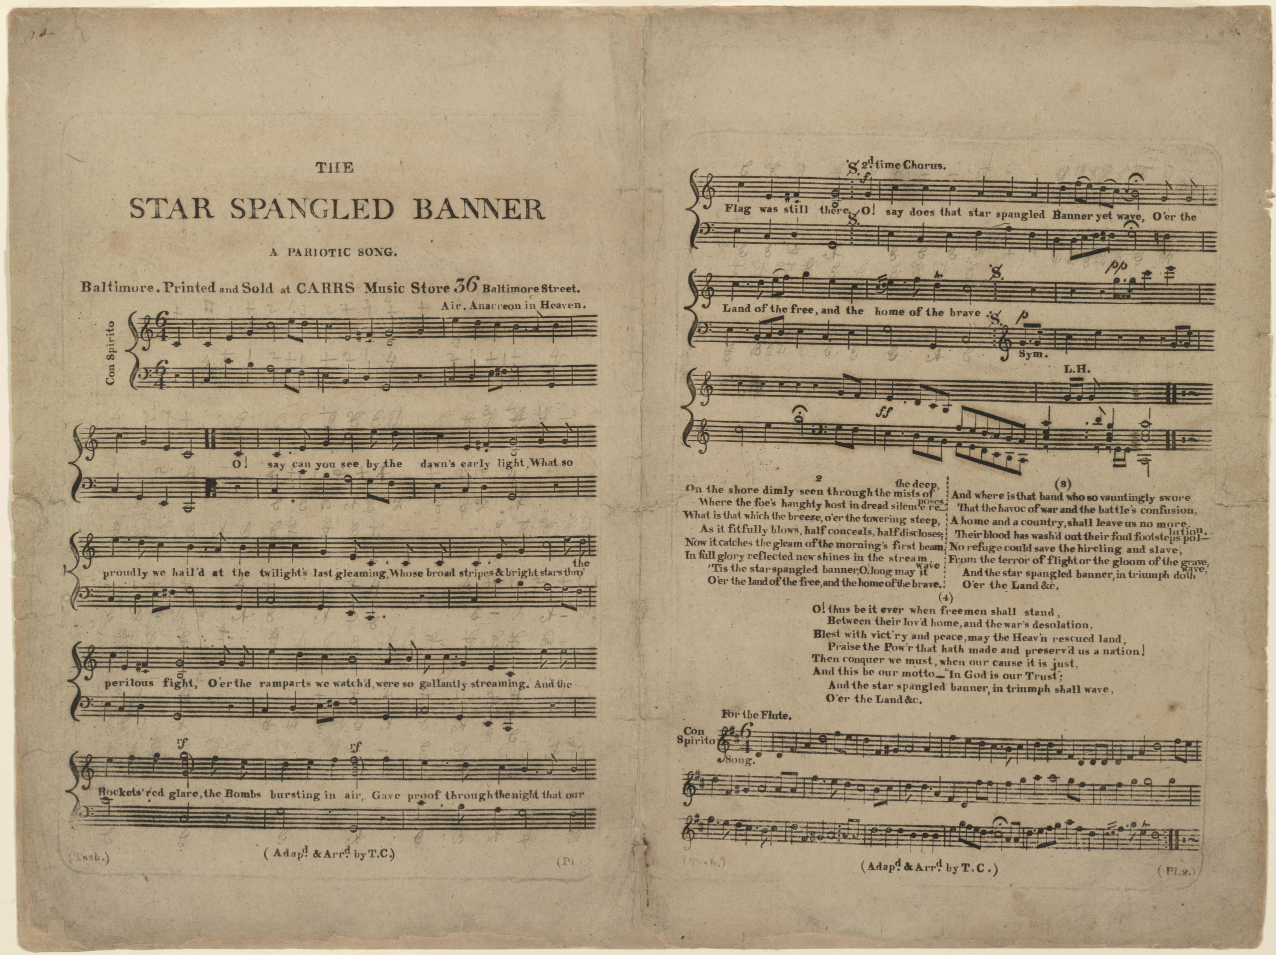 One of the 11 surviving copies of the first printed edition of The Star-Spangled Banner.